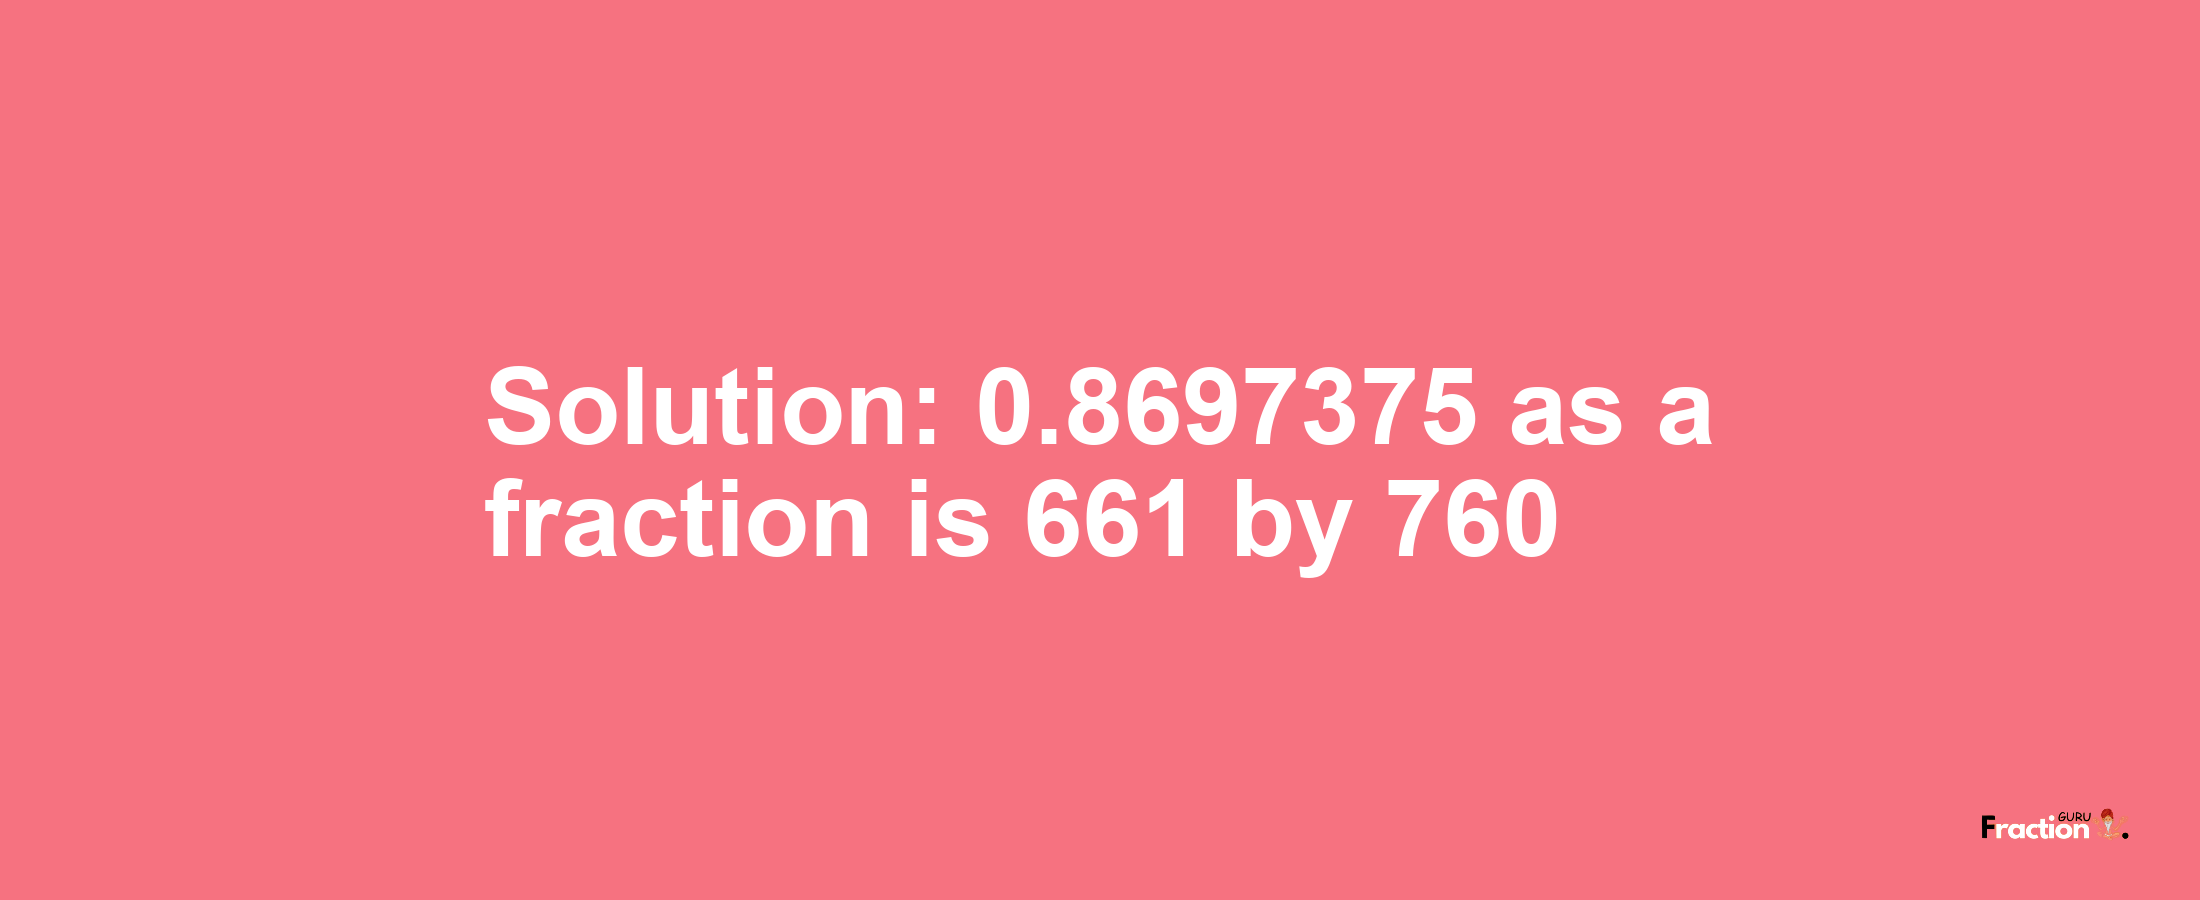 Solution:0.8697375 as a fraction is 661/760